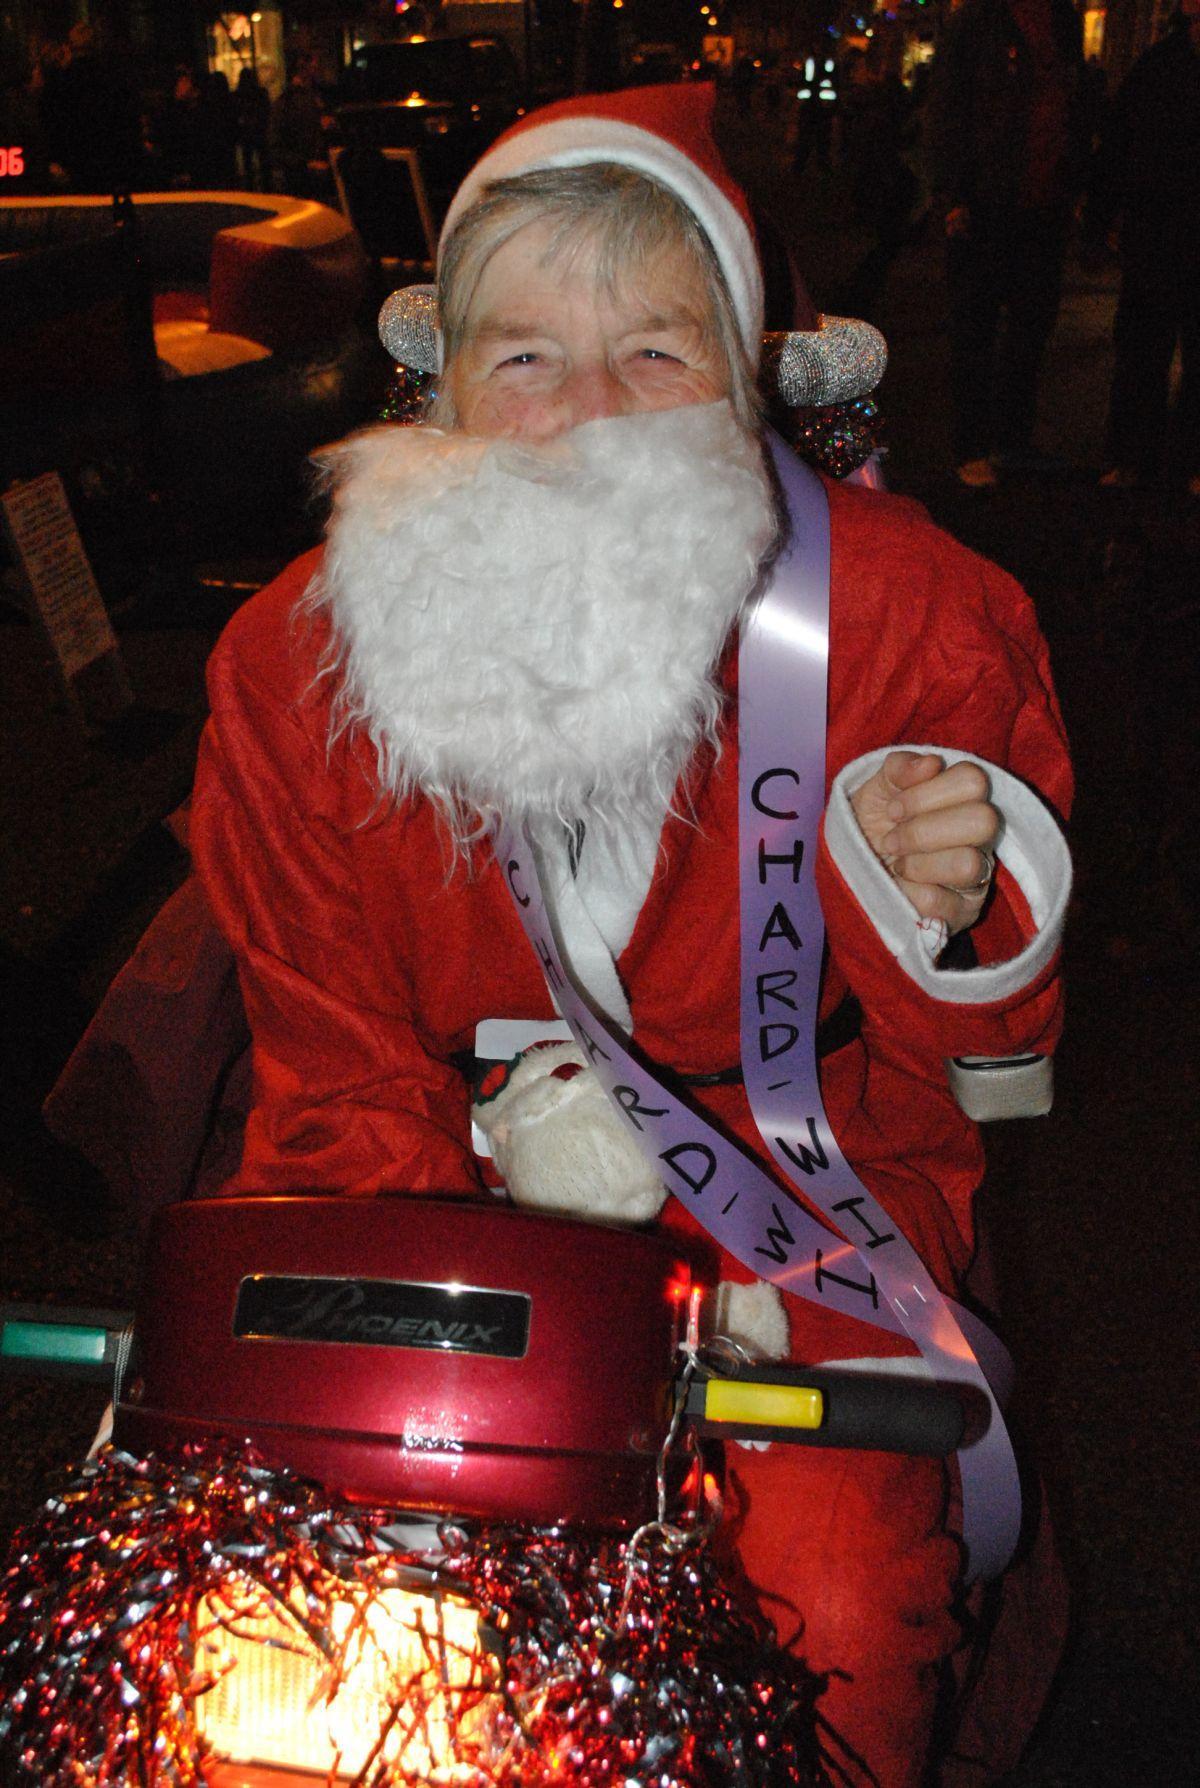 Photos from Chard Christmas lights switch-on and the Santa Fun Run. 
Photos by Christine Jones. 